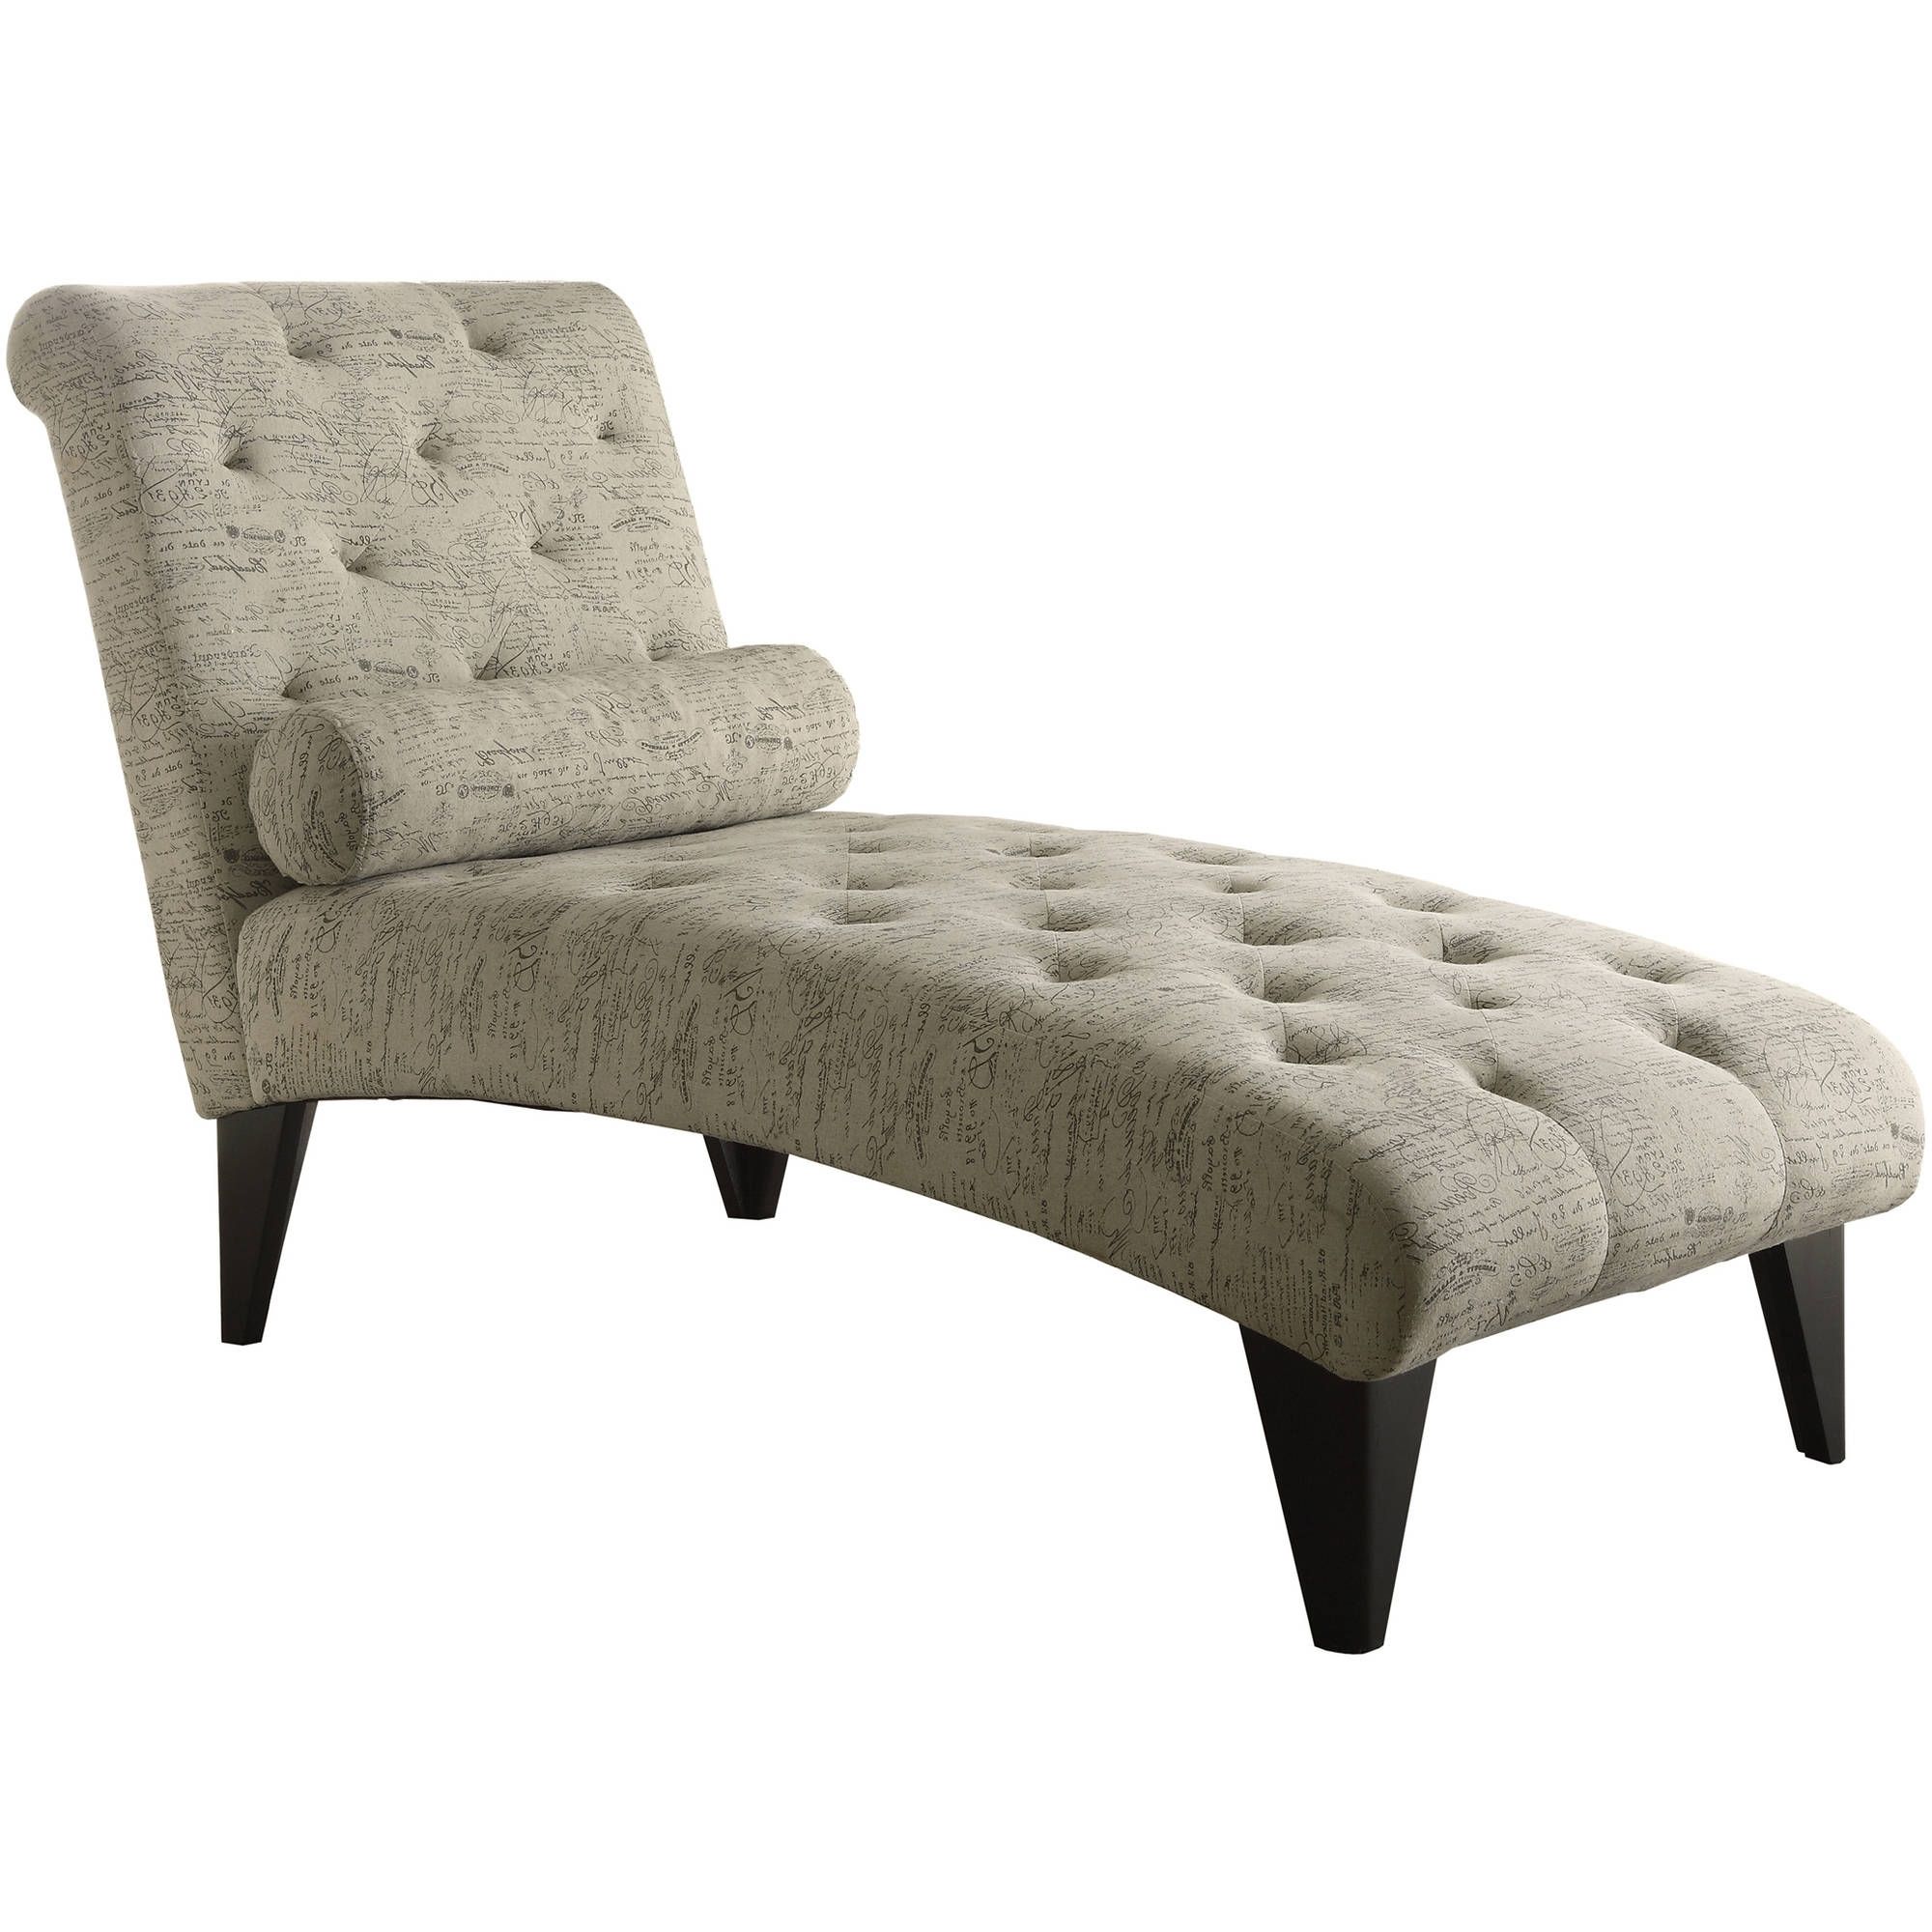 Chaise Lounges With Recent Chaise Lounges – Walmart (View 7 of 15)